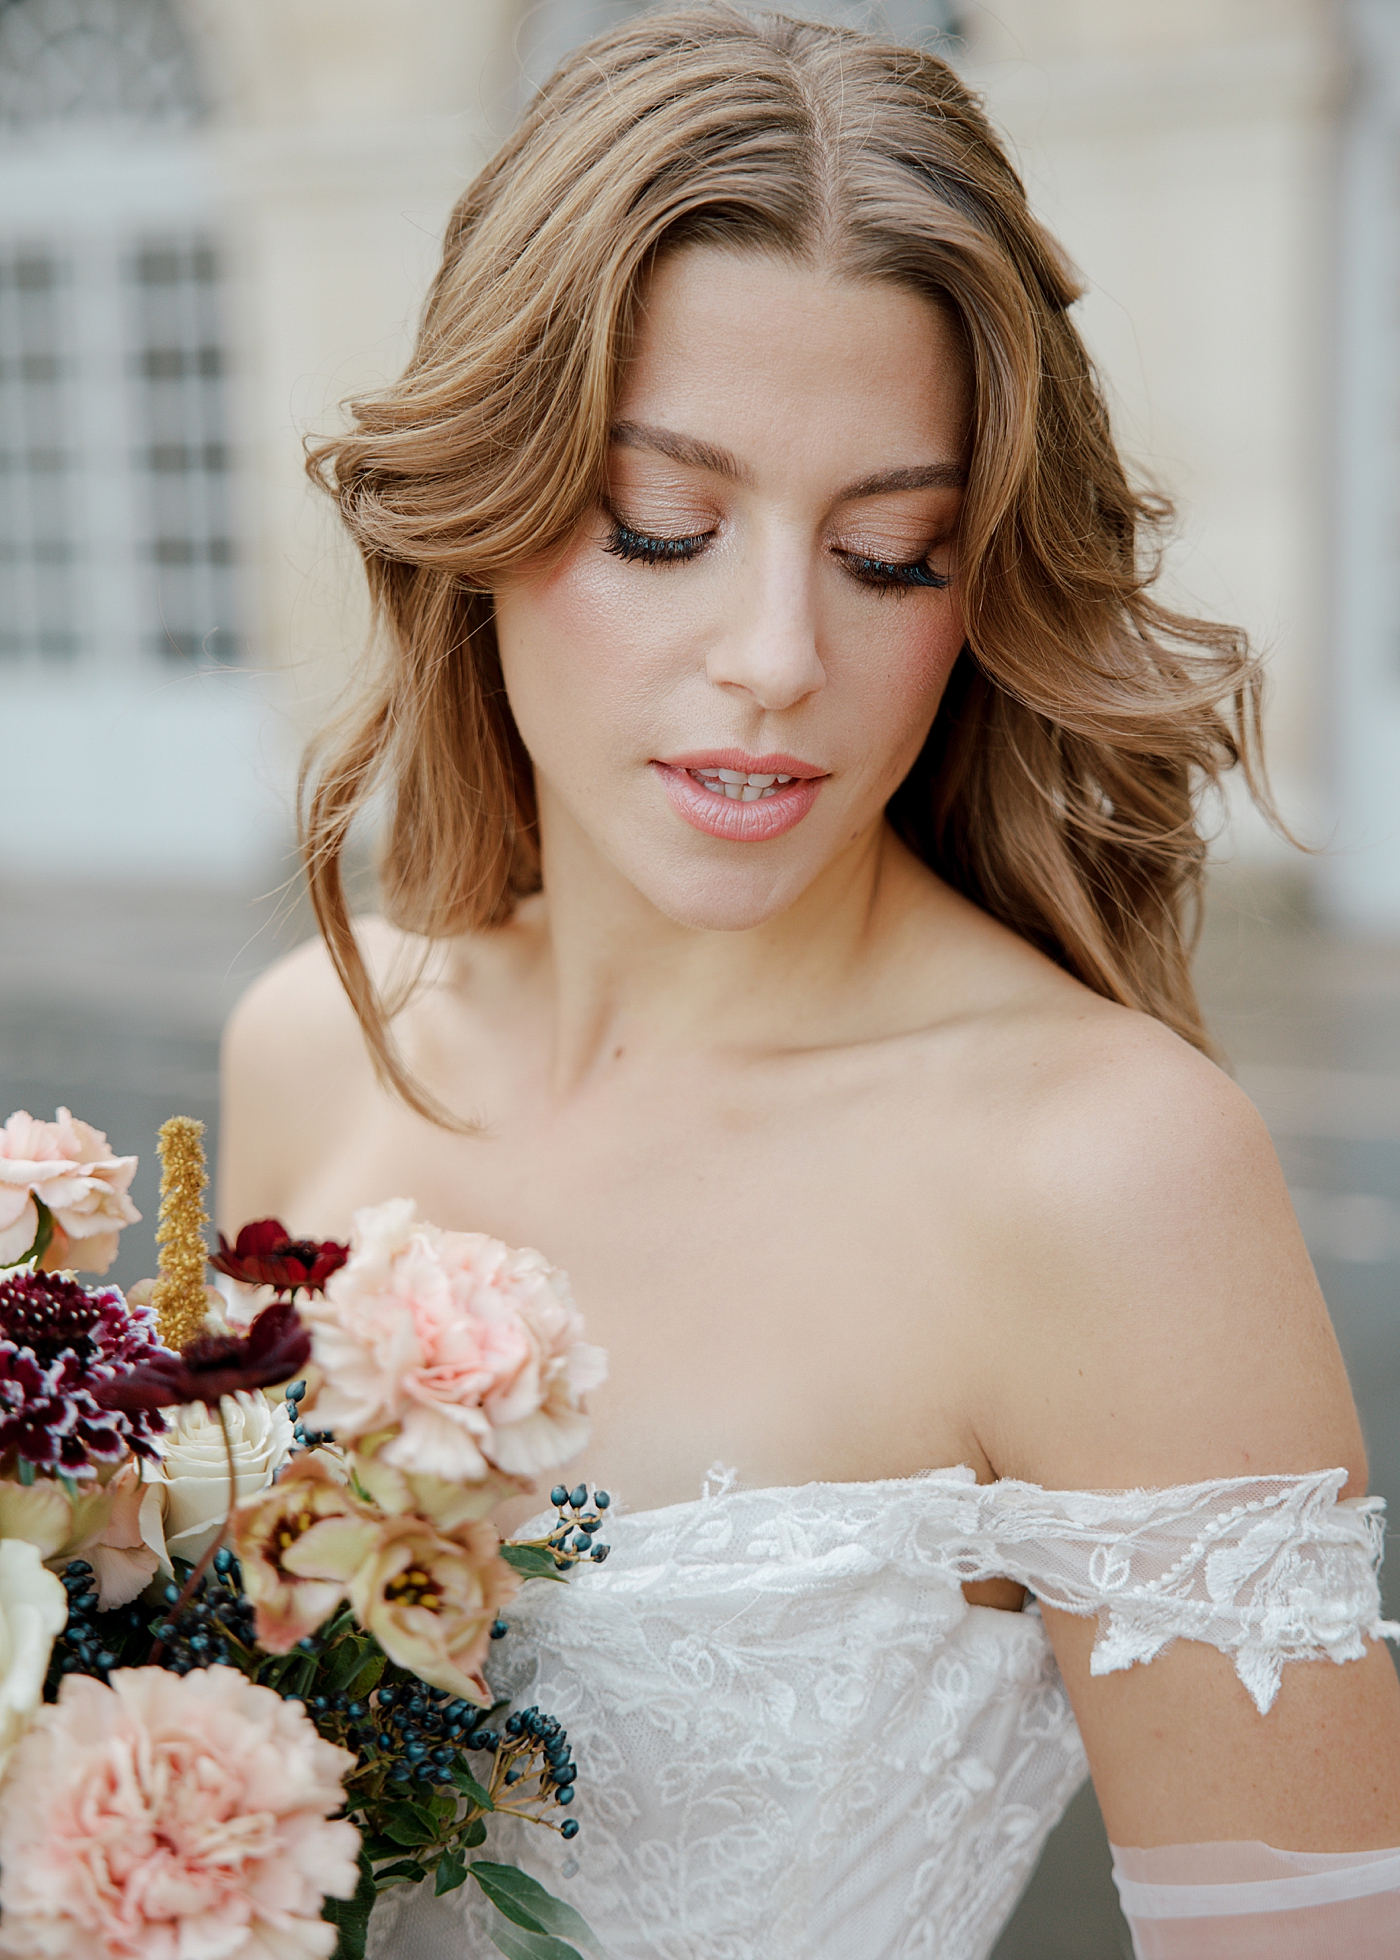 Close up of bride in an off the shoulder dress and white sheer gloves holding a wedding bouquet while looking down over her shoulder | Image by Hope Helmuth Photography